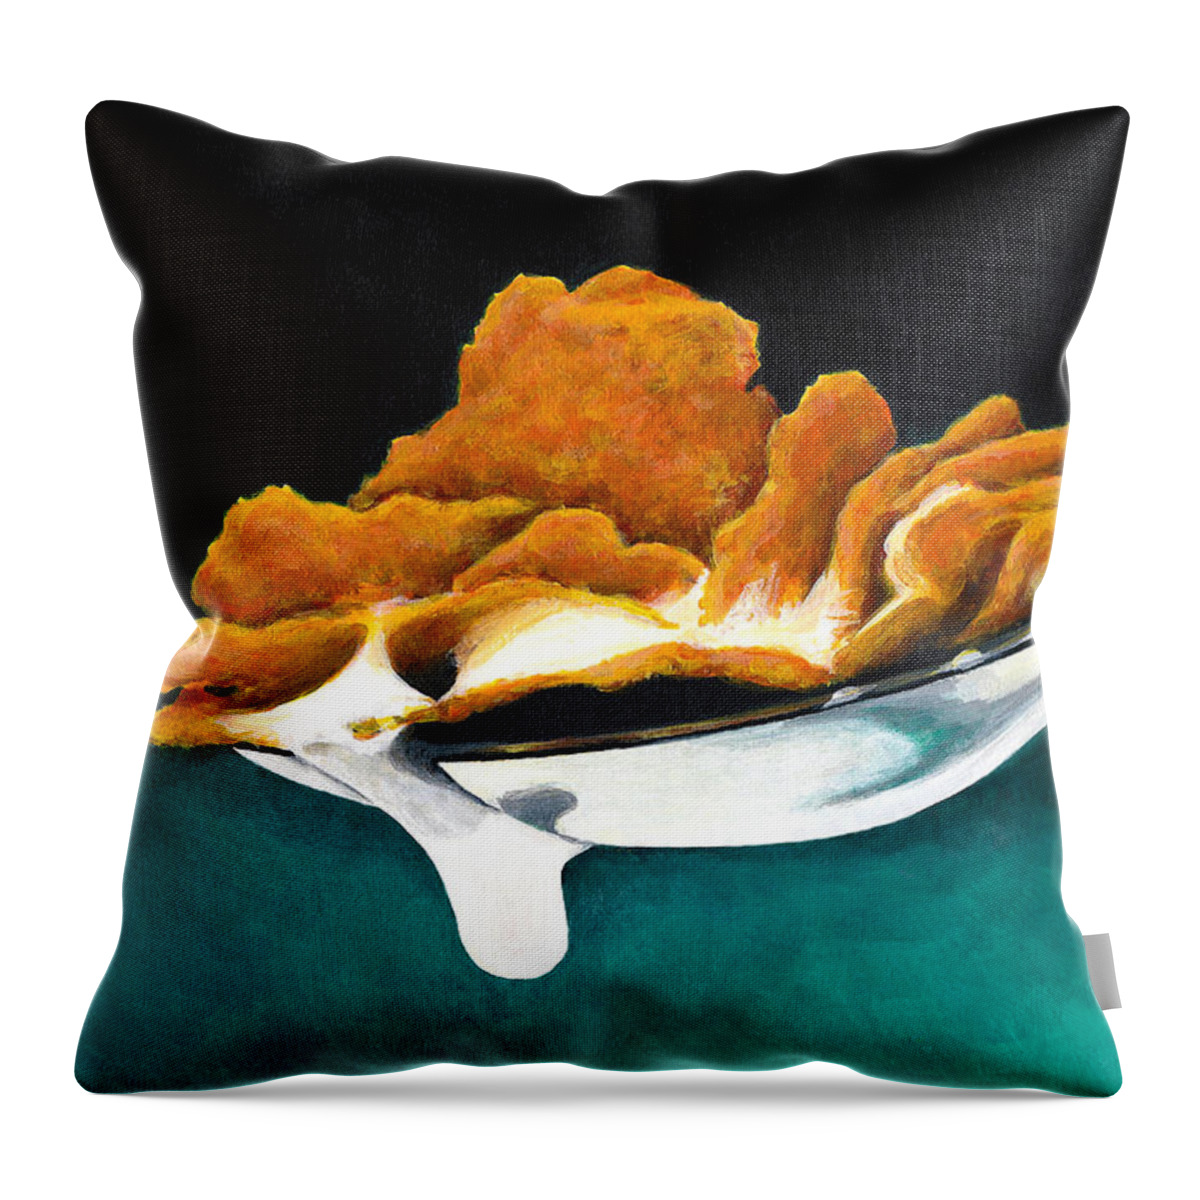 Painting Throw Pillow featuring the painting Cereal In Spoon With Milk by Janice Dunbar